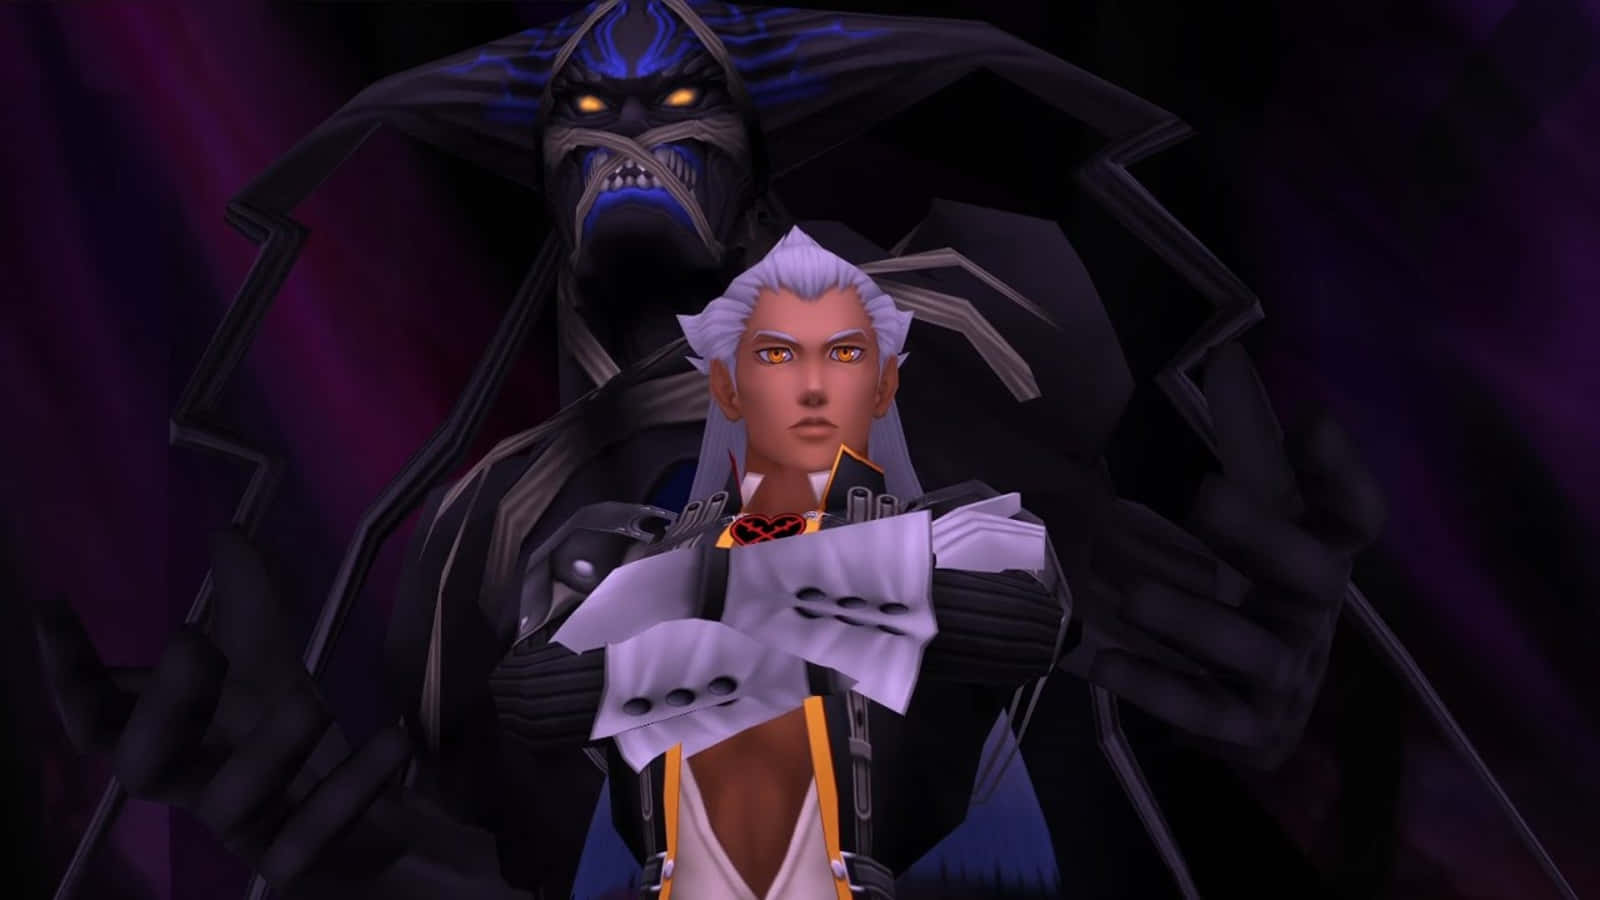 Ansem Seeker of Darkness in a dramatic pose Wallpaper